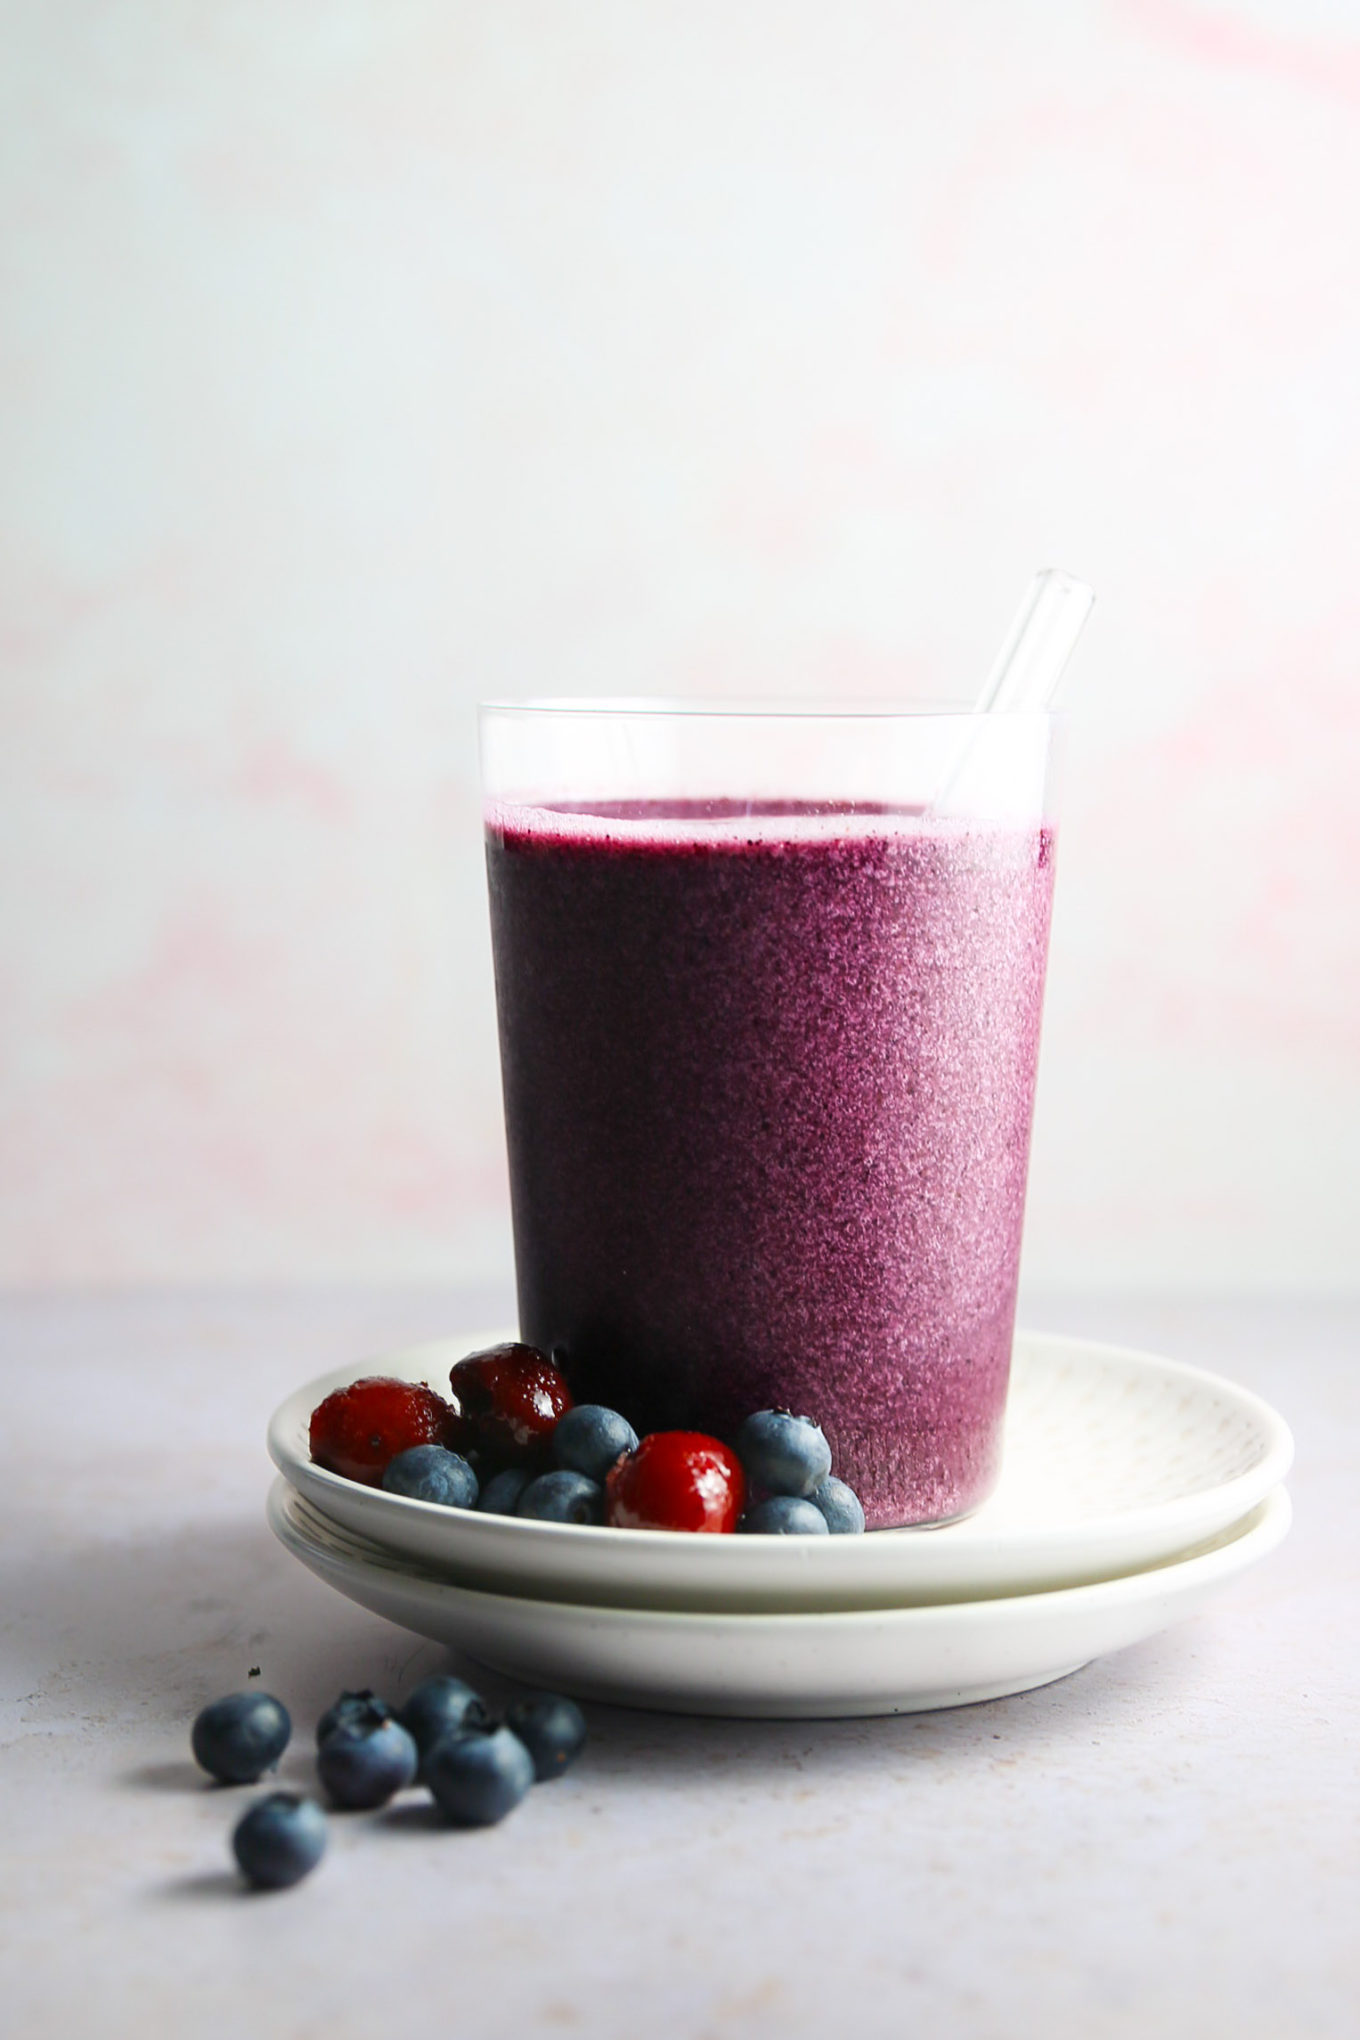 A blueberry smoothie with blackberries on a plate.